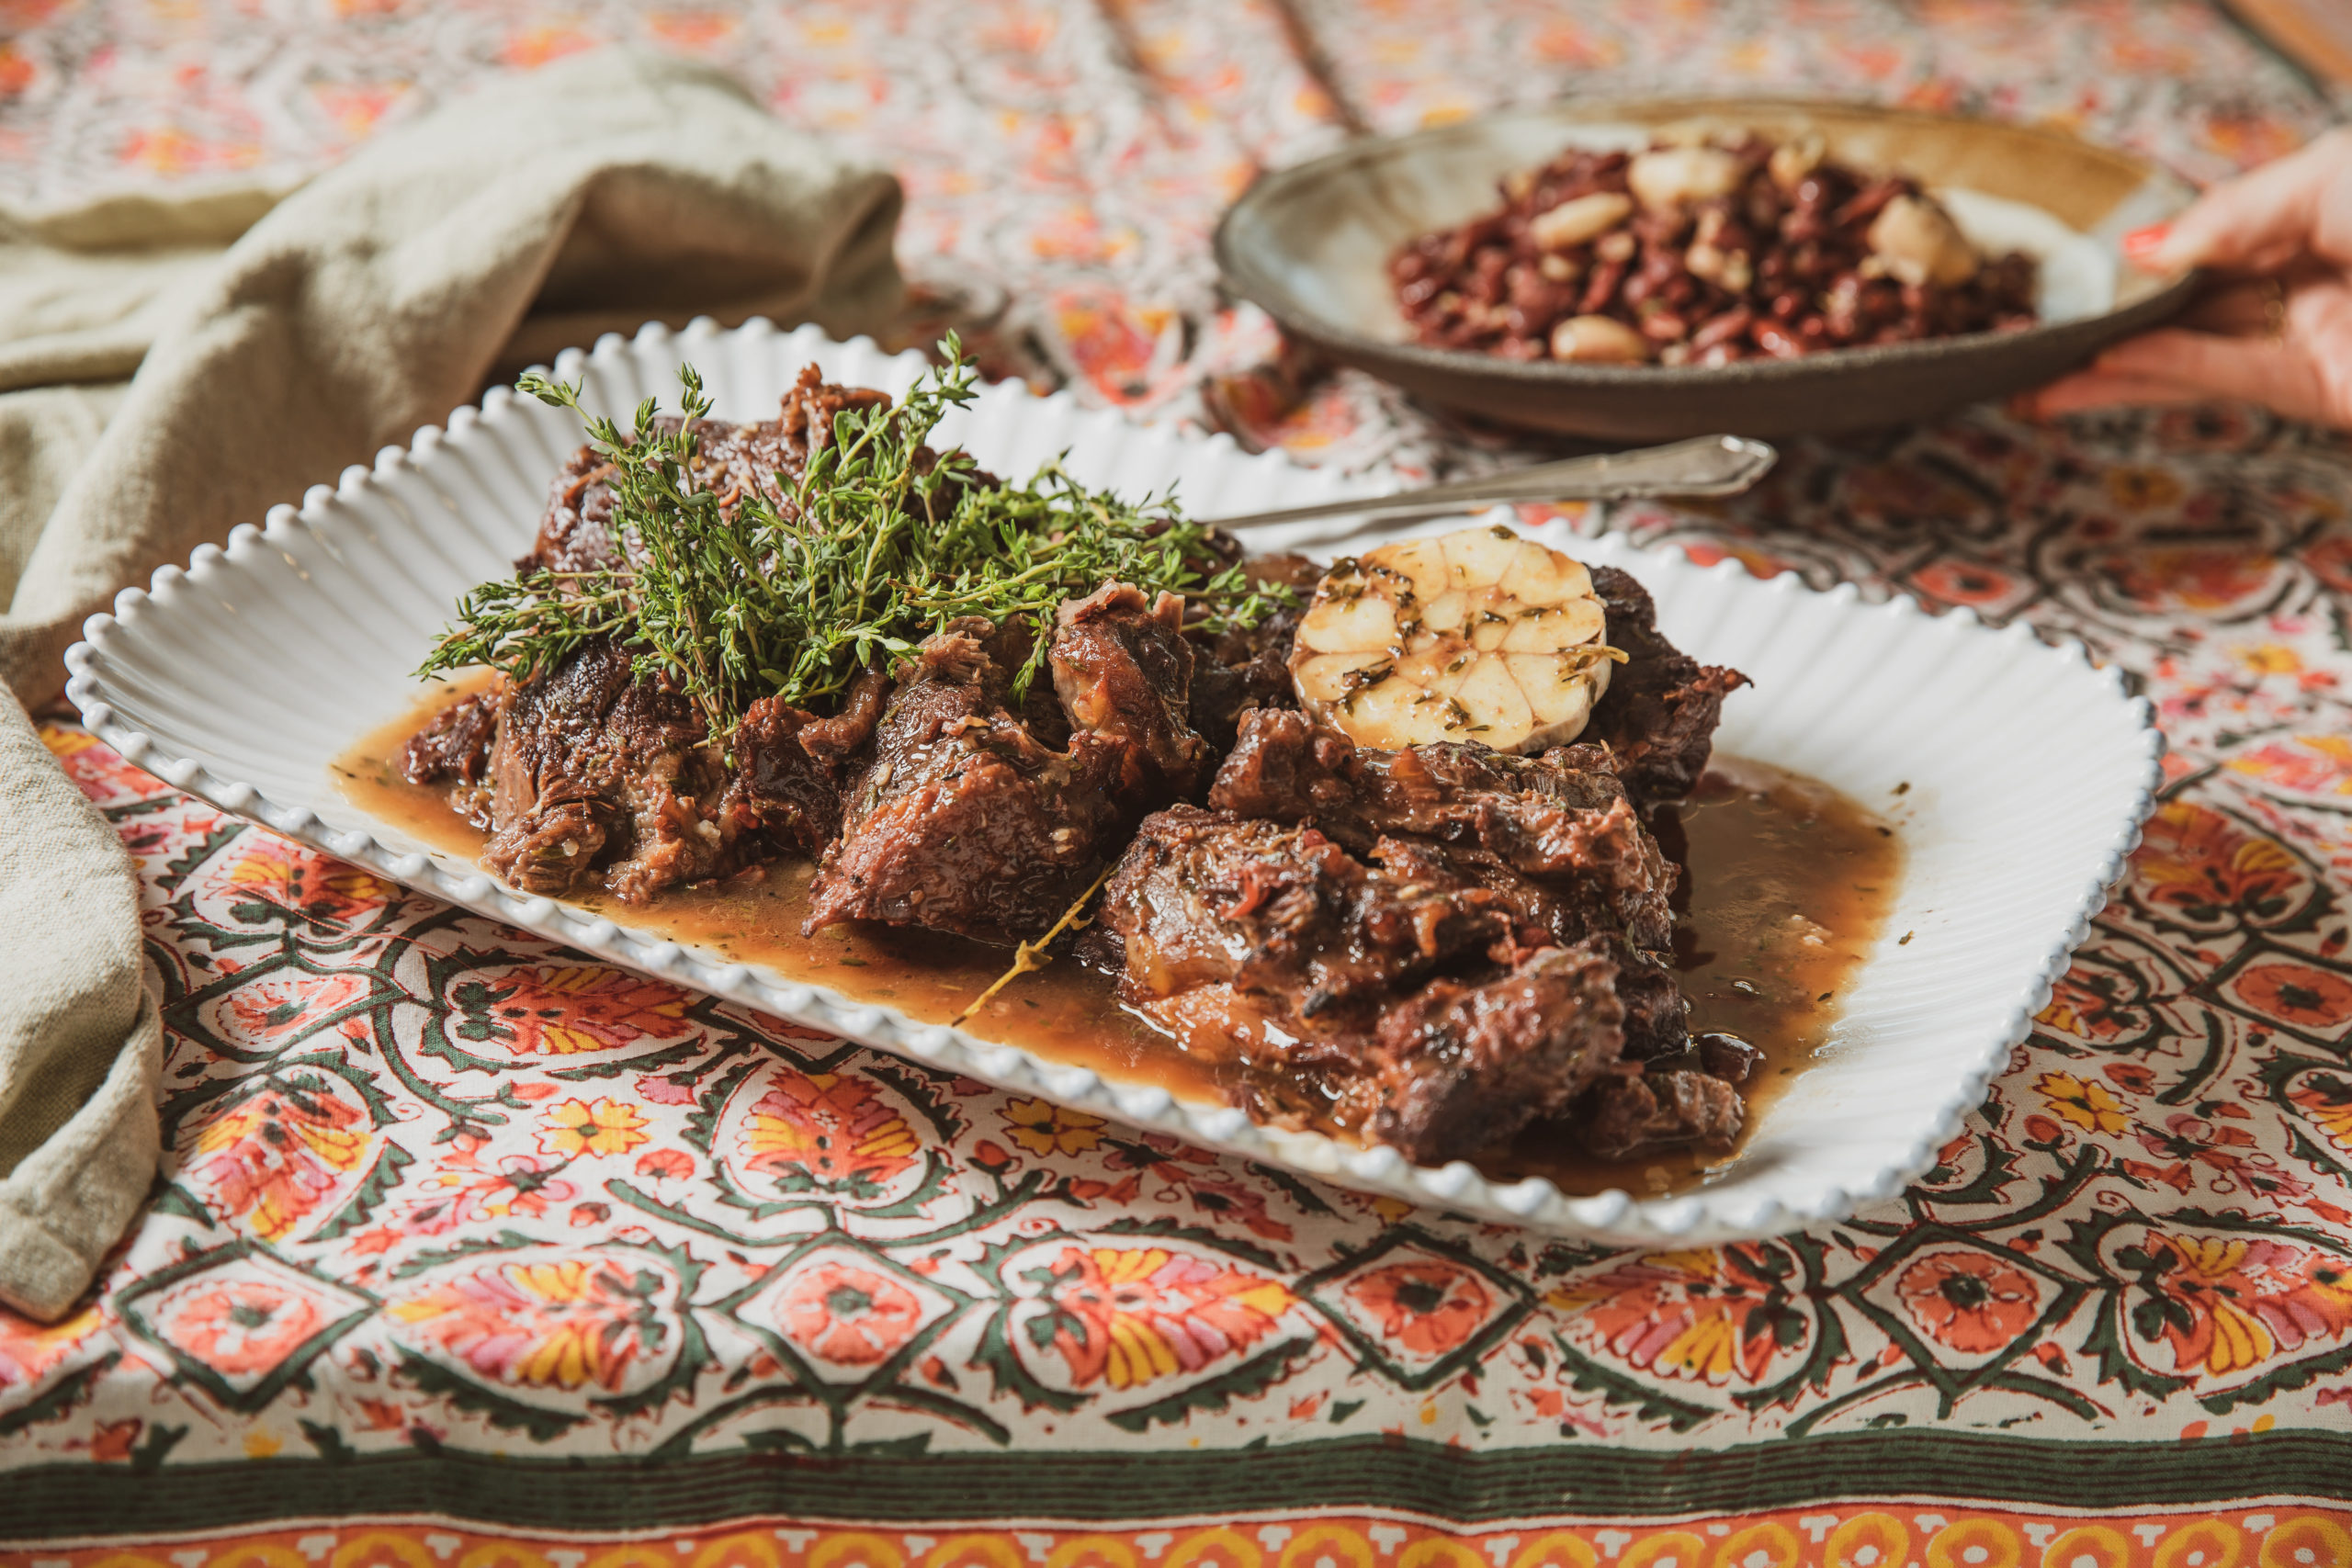 A platter of beef cheek stew and a bowl of kidney beans atop a colorful tablecloth